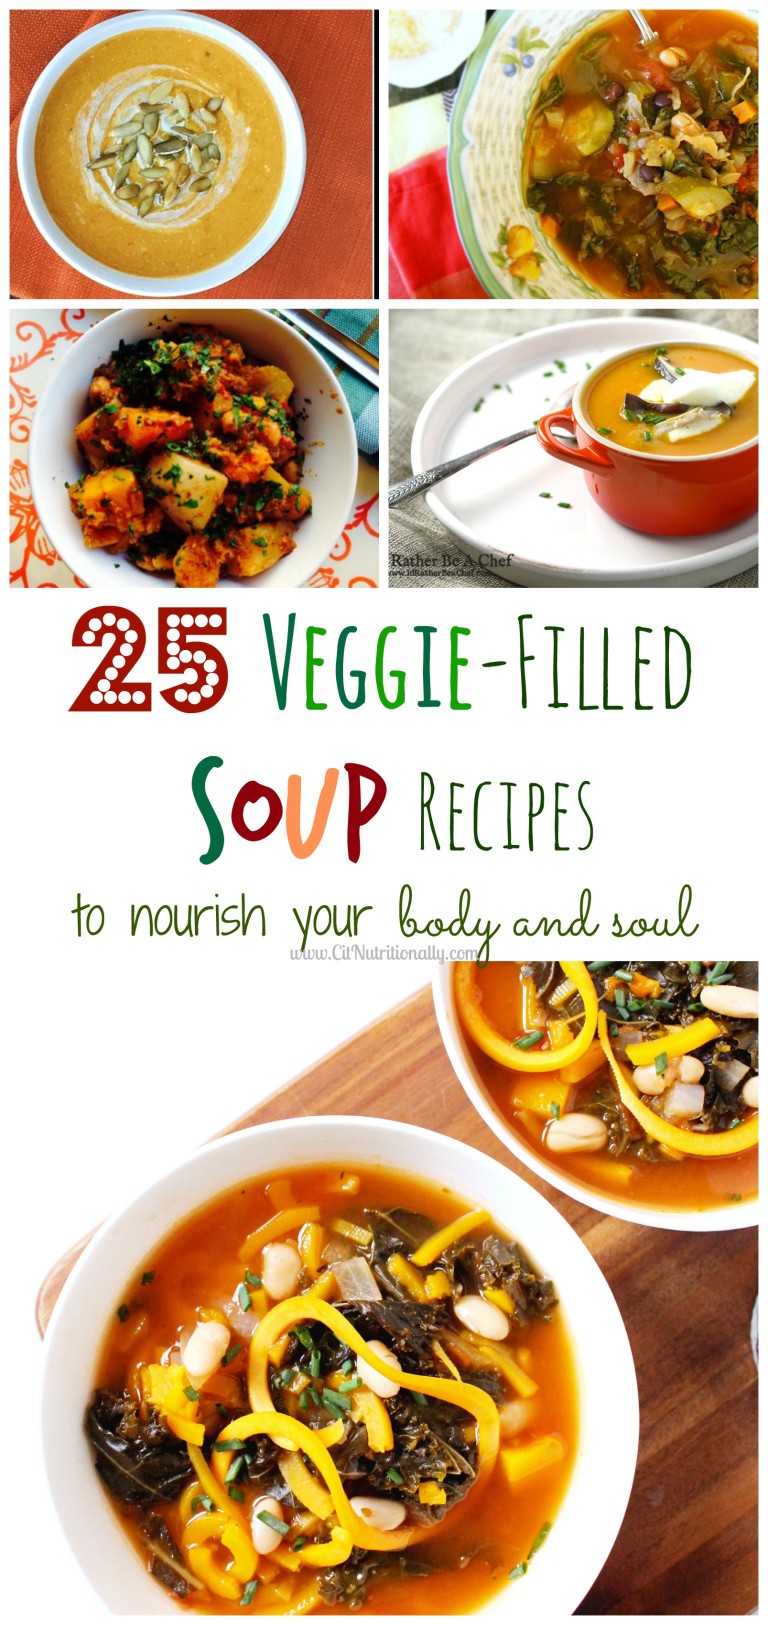 25 Veggie-Filled Soup Recipes to Nourish Your Body and Soul - Chelsey Amer